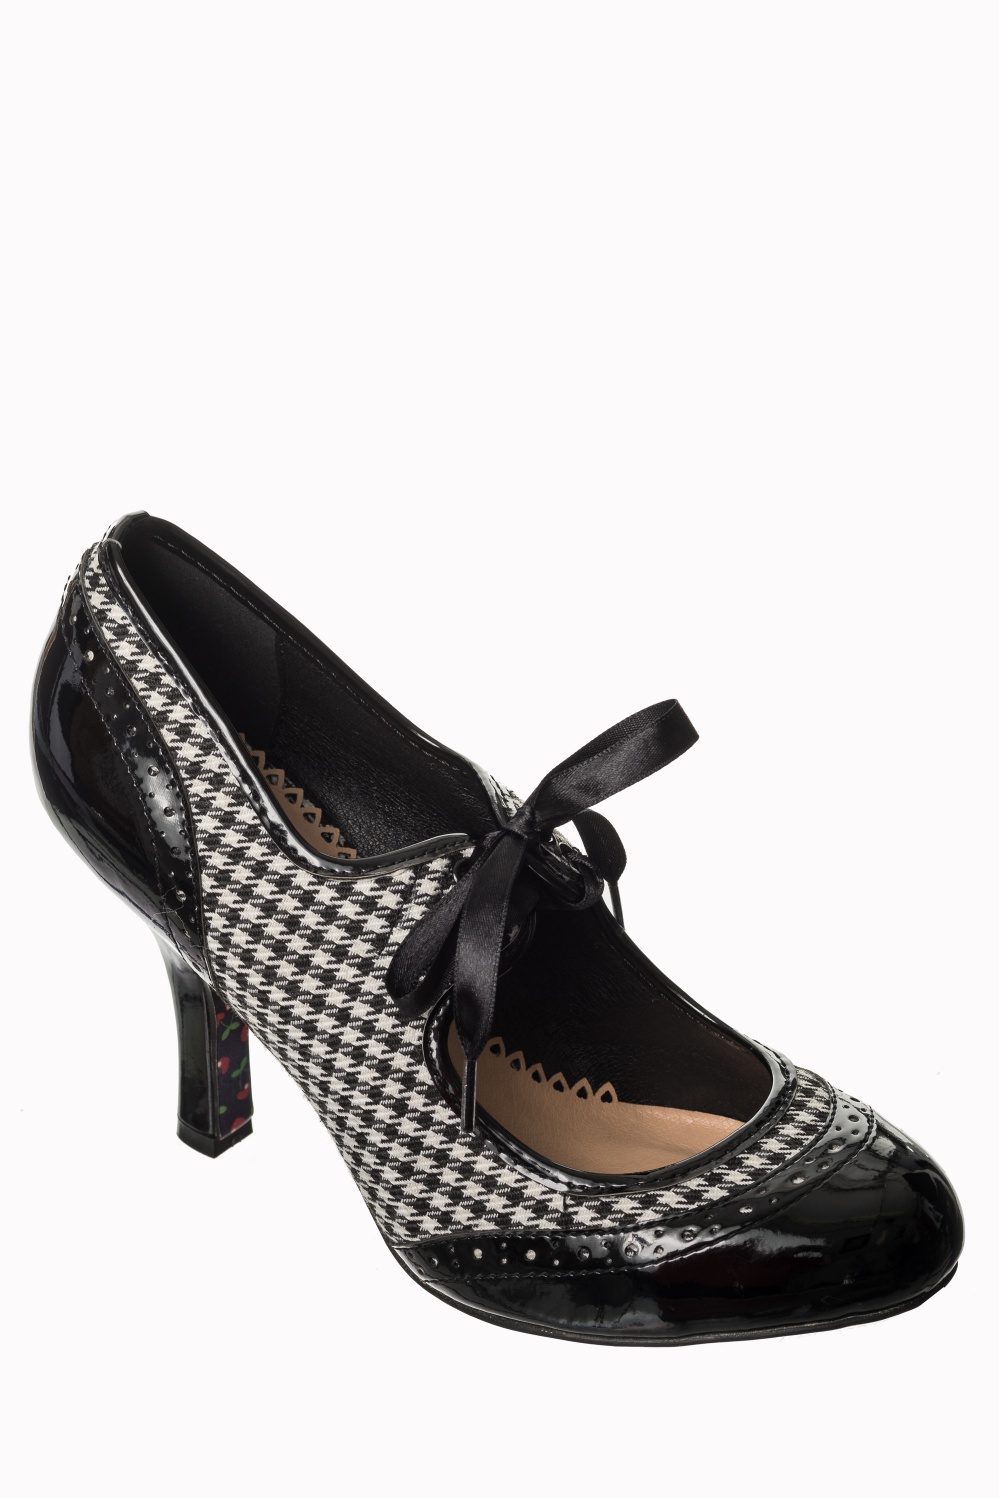 Dancing Days Houndstooth 50s Shoes